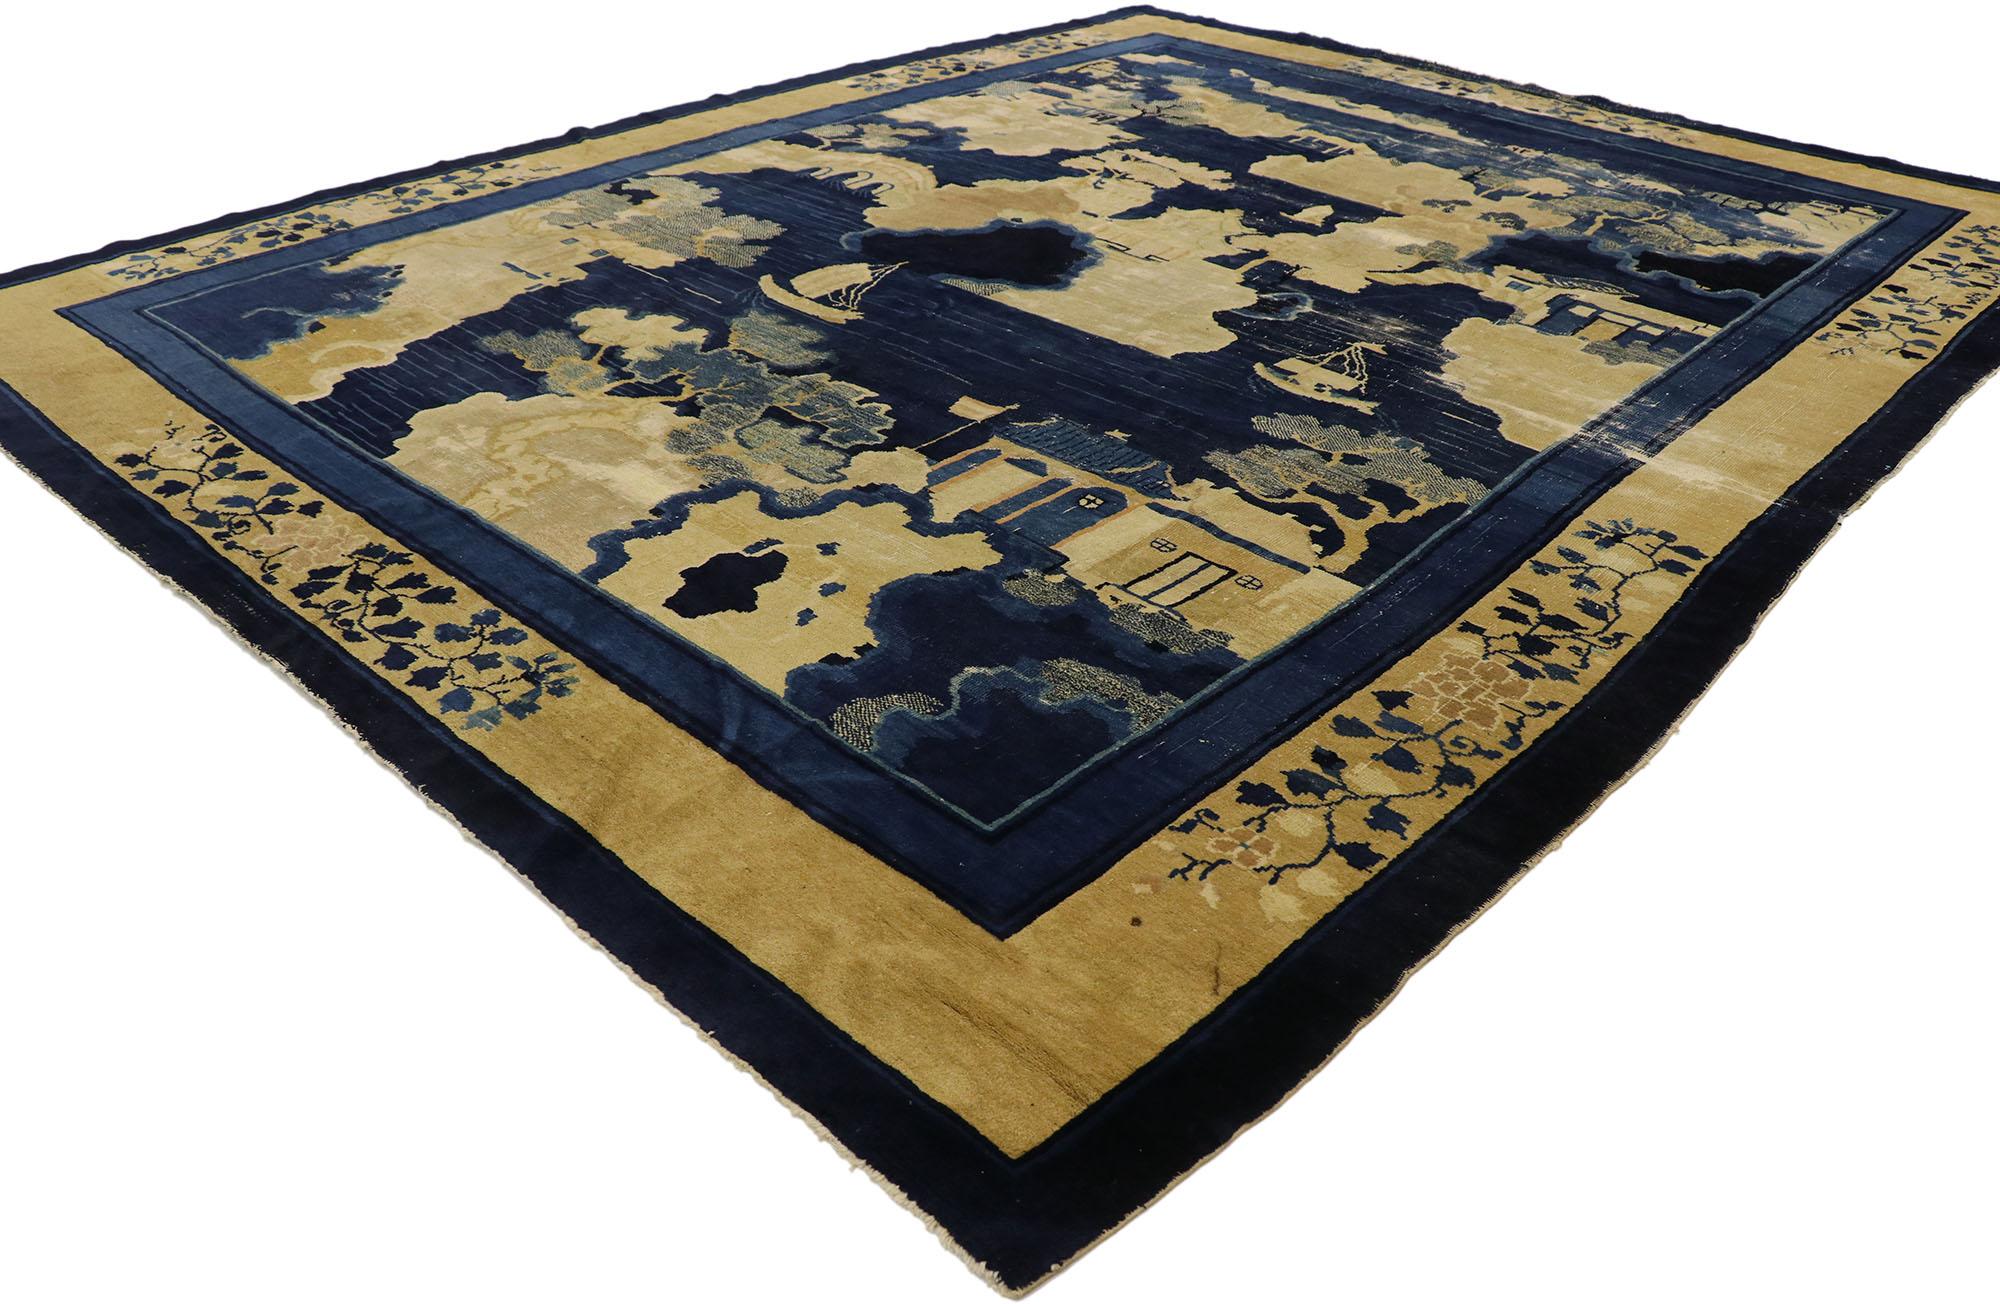 77556, distressed antique Chinese Baotou Pictorial rug with landscape design. This hand knotted wool distressed antique Chinese Baotou Pictorial rug features a striking landscape scene overlaid upon an abrashed ink blue field. With its cold, arid